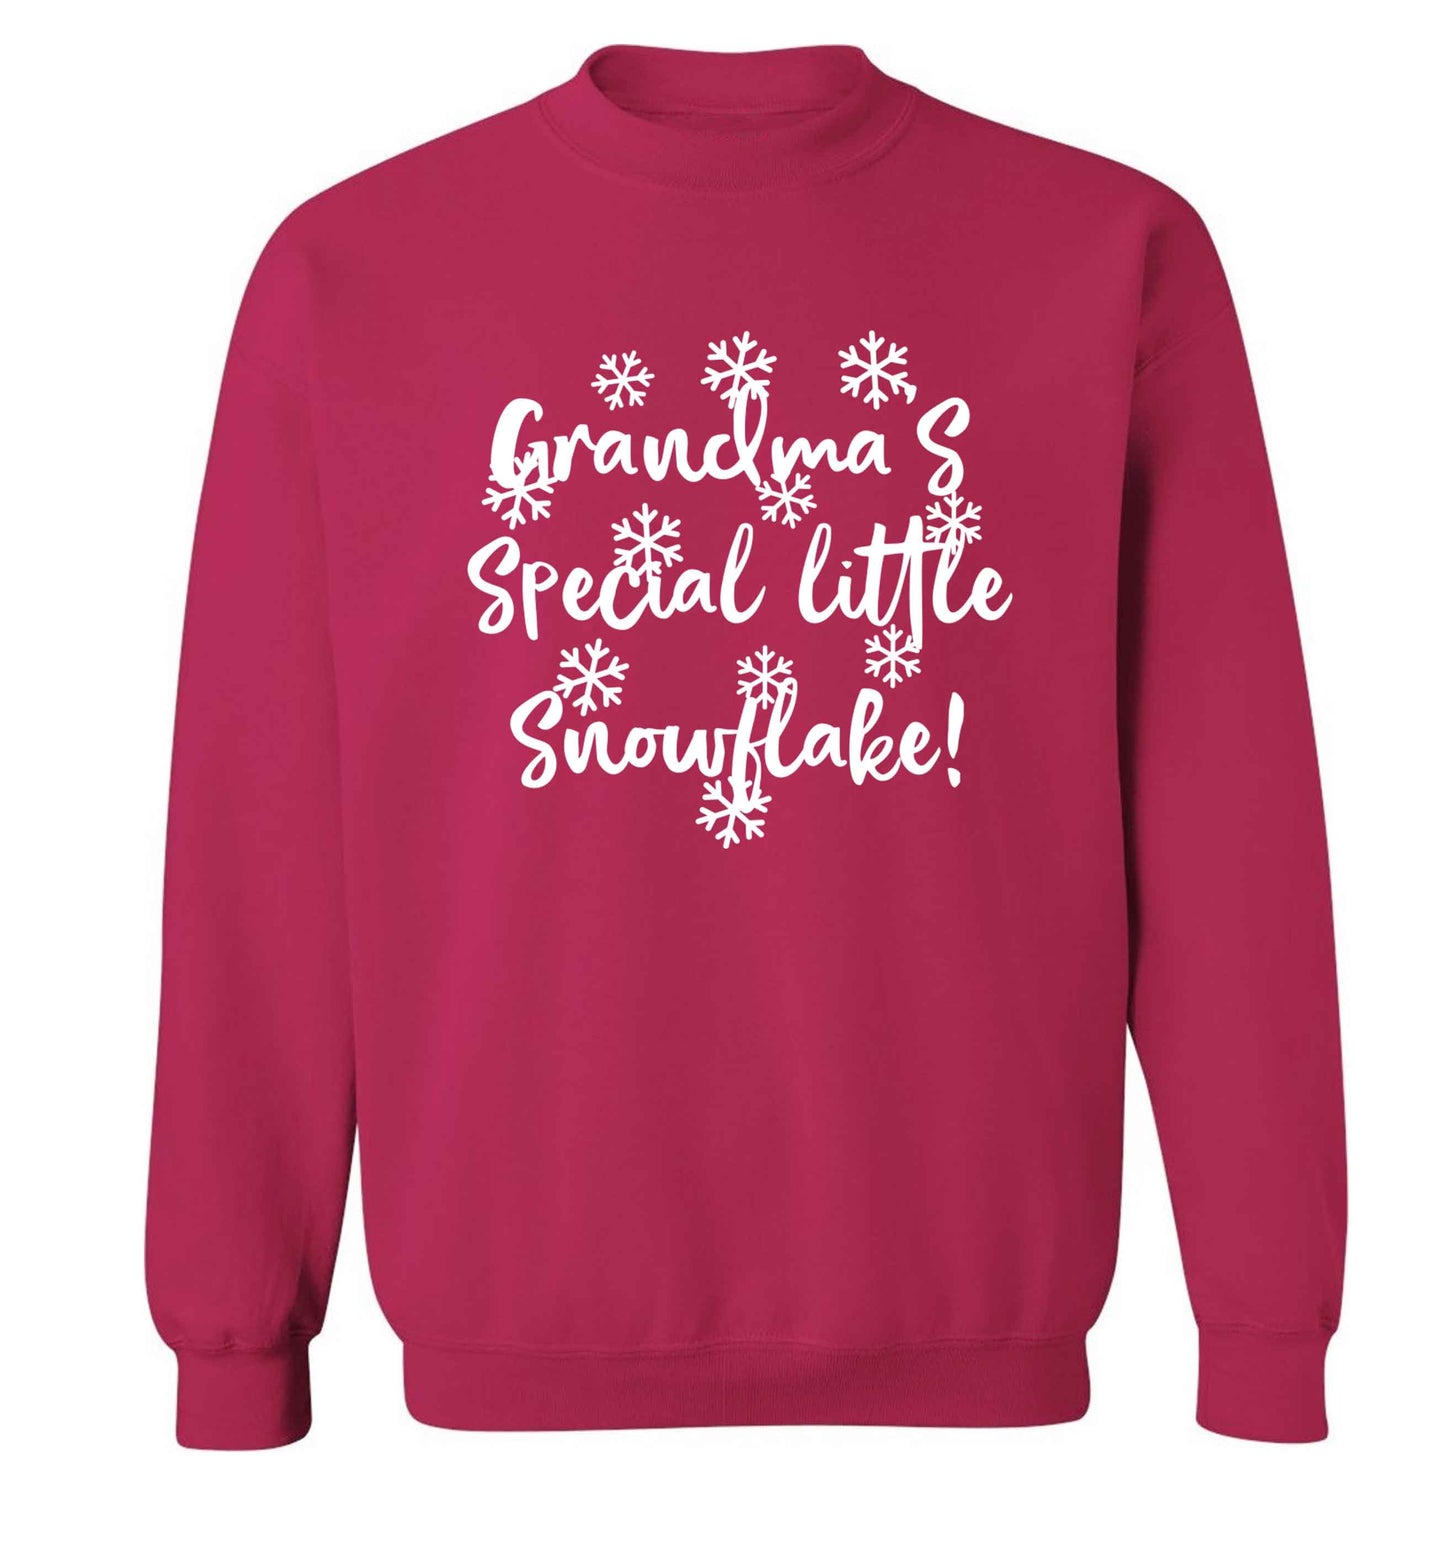 Grandma's special little snowflake Adult's unisex pink Sweater 2XL